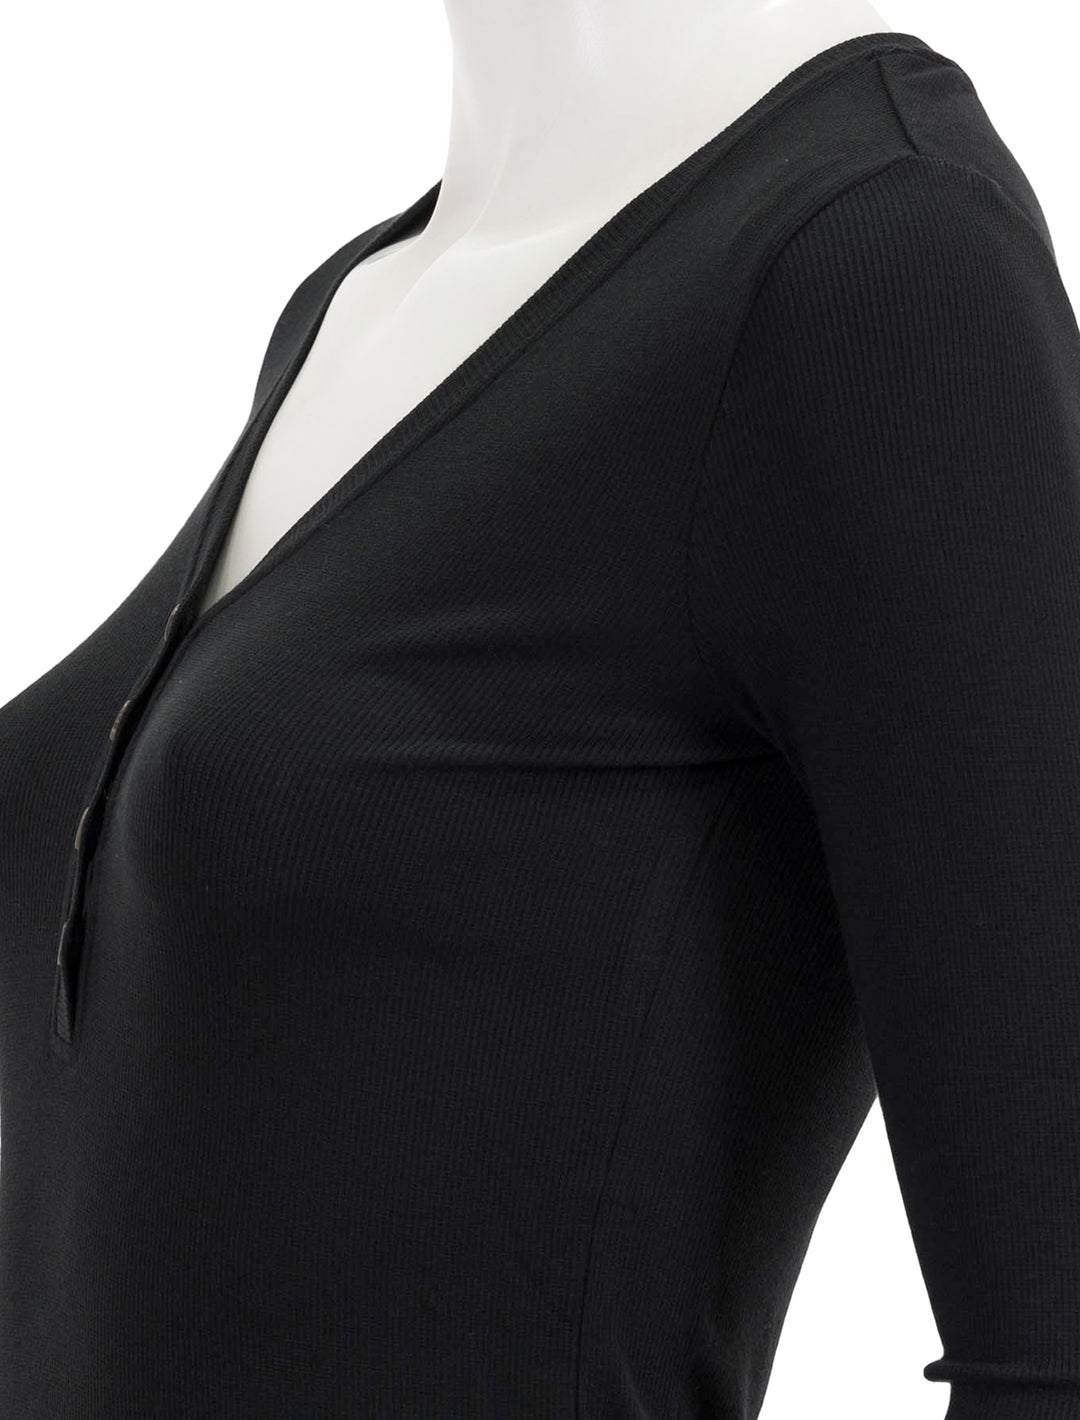 Close-up view of Marine Layer's lexi rib henley in black.